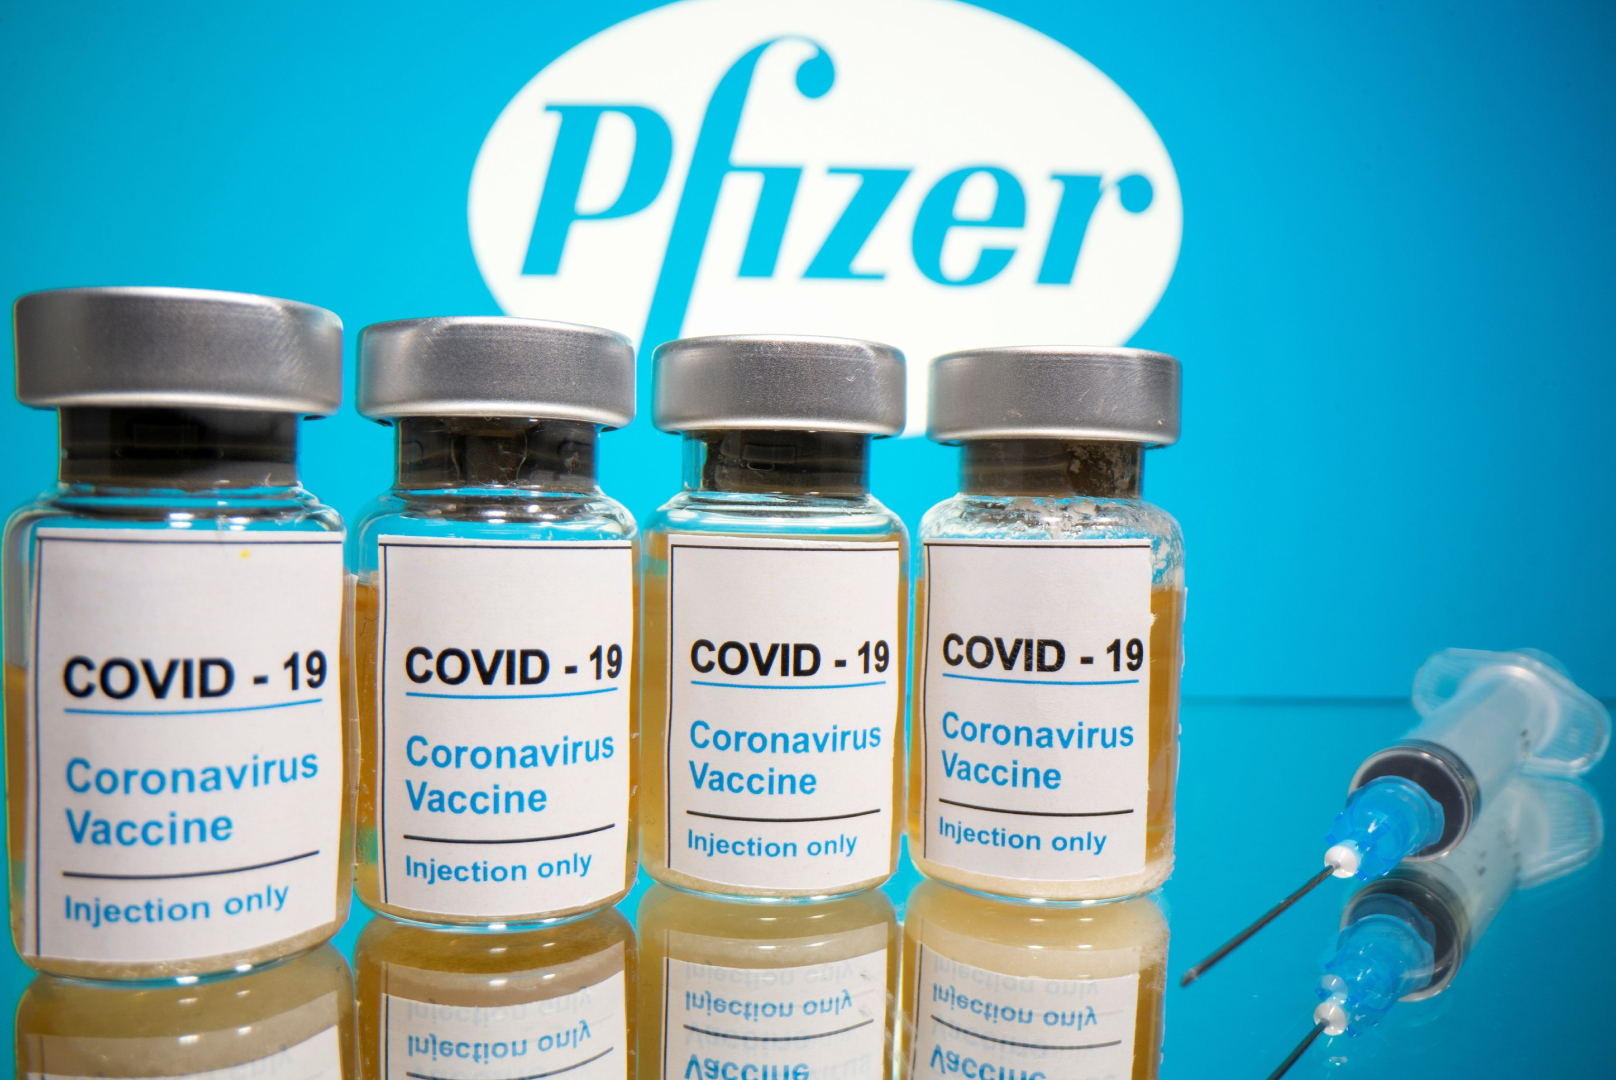  US Approves Pfizer Vaccine It Will Be Free For All Americans Trump